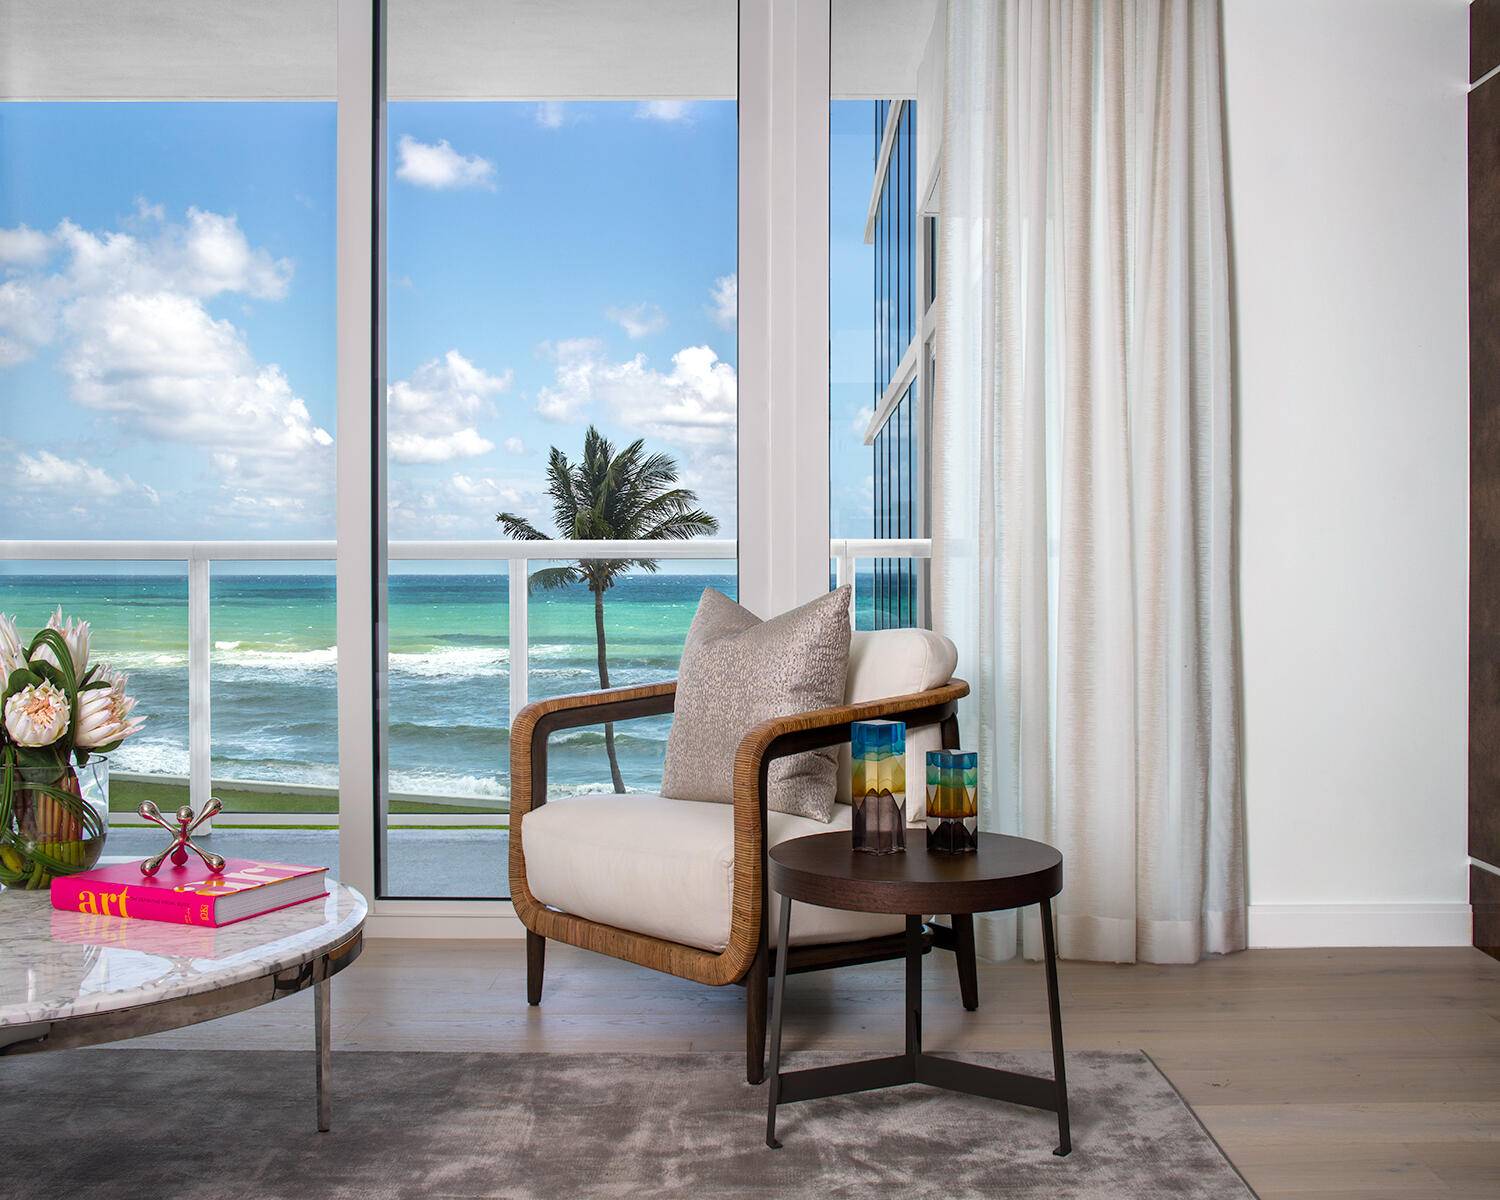 This never before lived in beachfront condo features 3 bedrooms plus separate den 3.